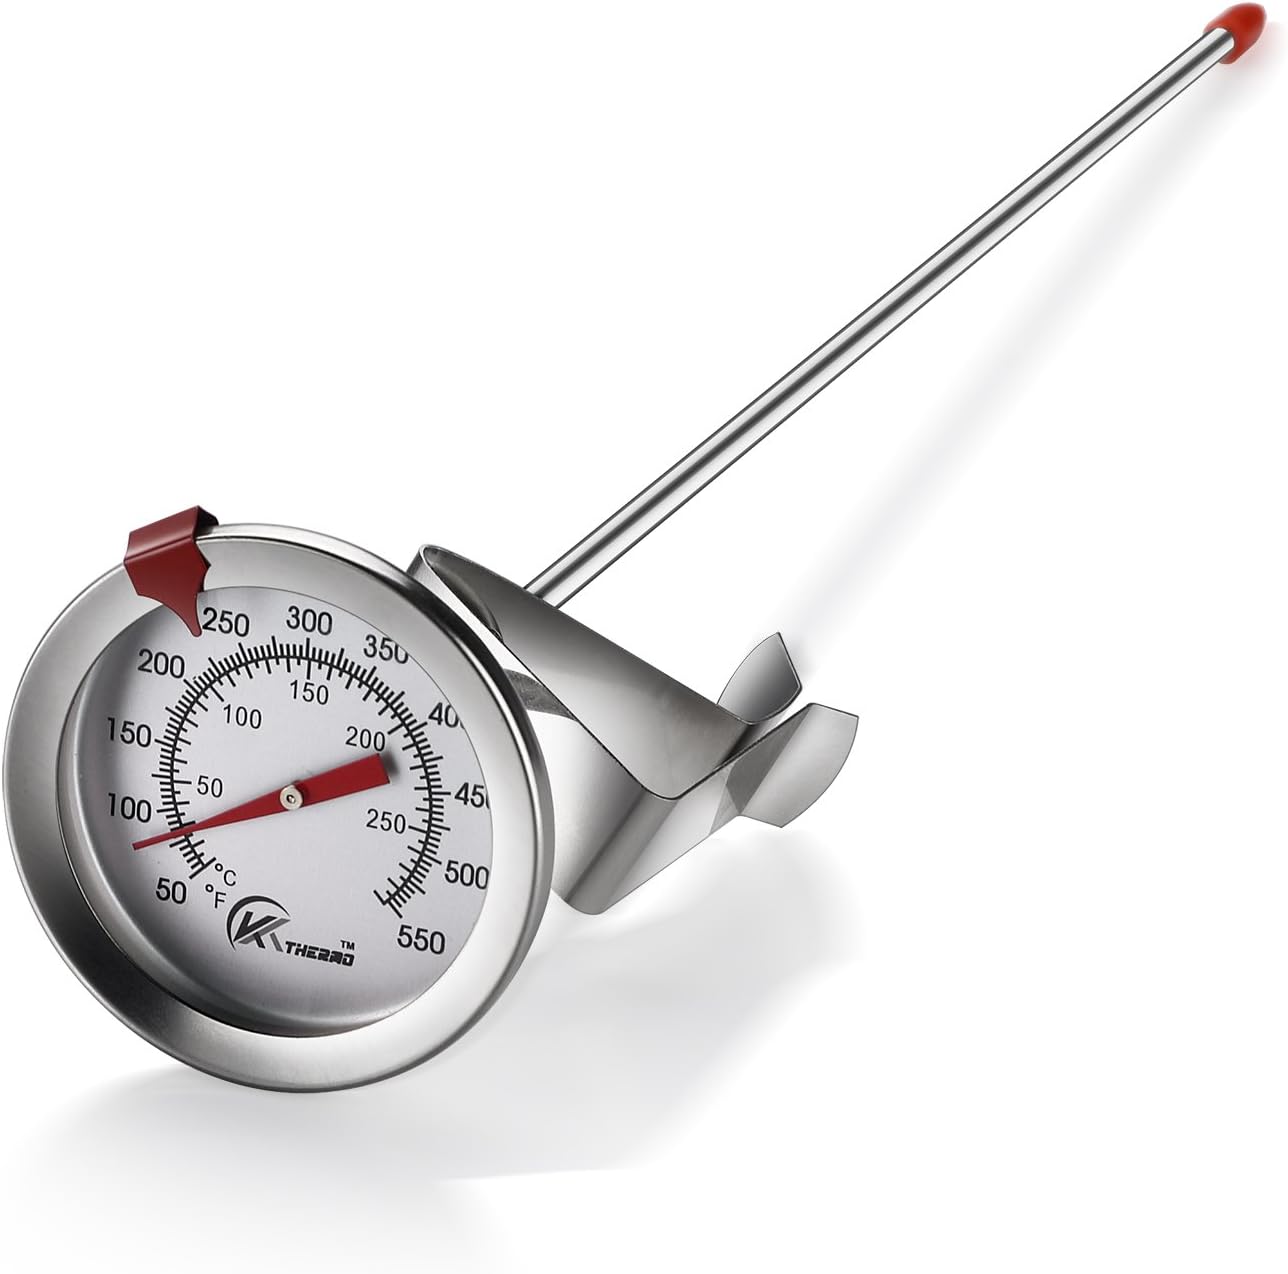 KT THERMO Deep Fry Thermometer With Instant Read,Dial Thermometer,12 Stainless Steel Stem Meat Cooking Thermometer,Best for Turkey,BBQ,Grill